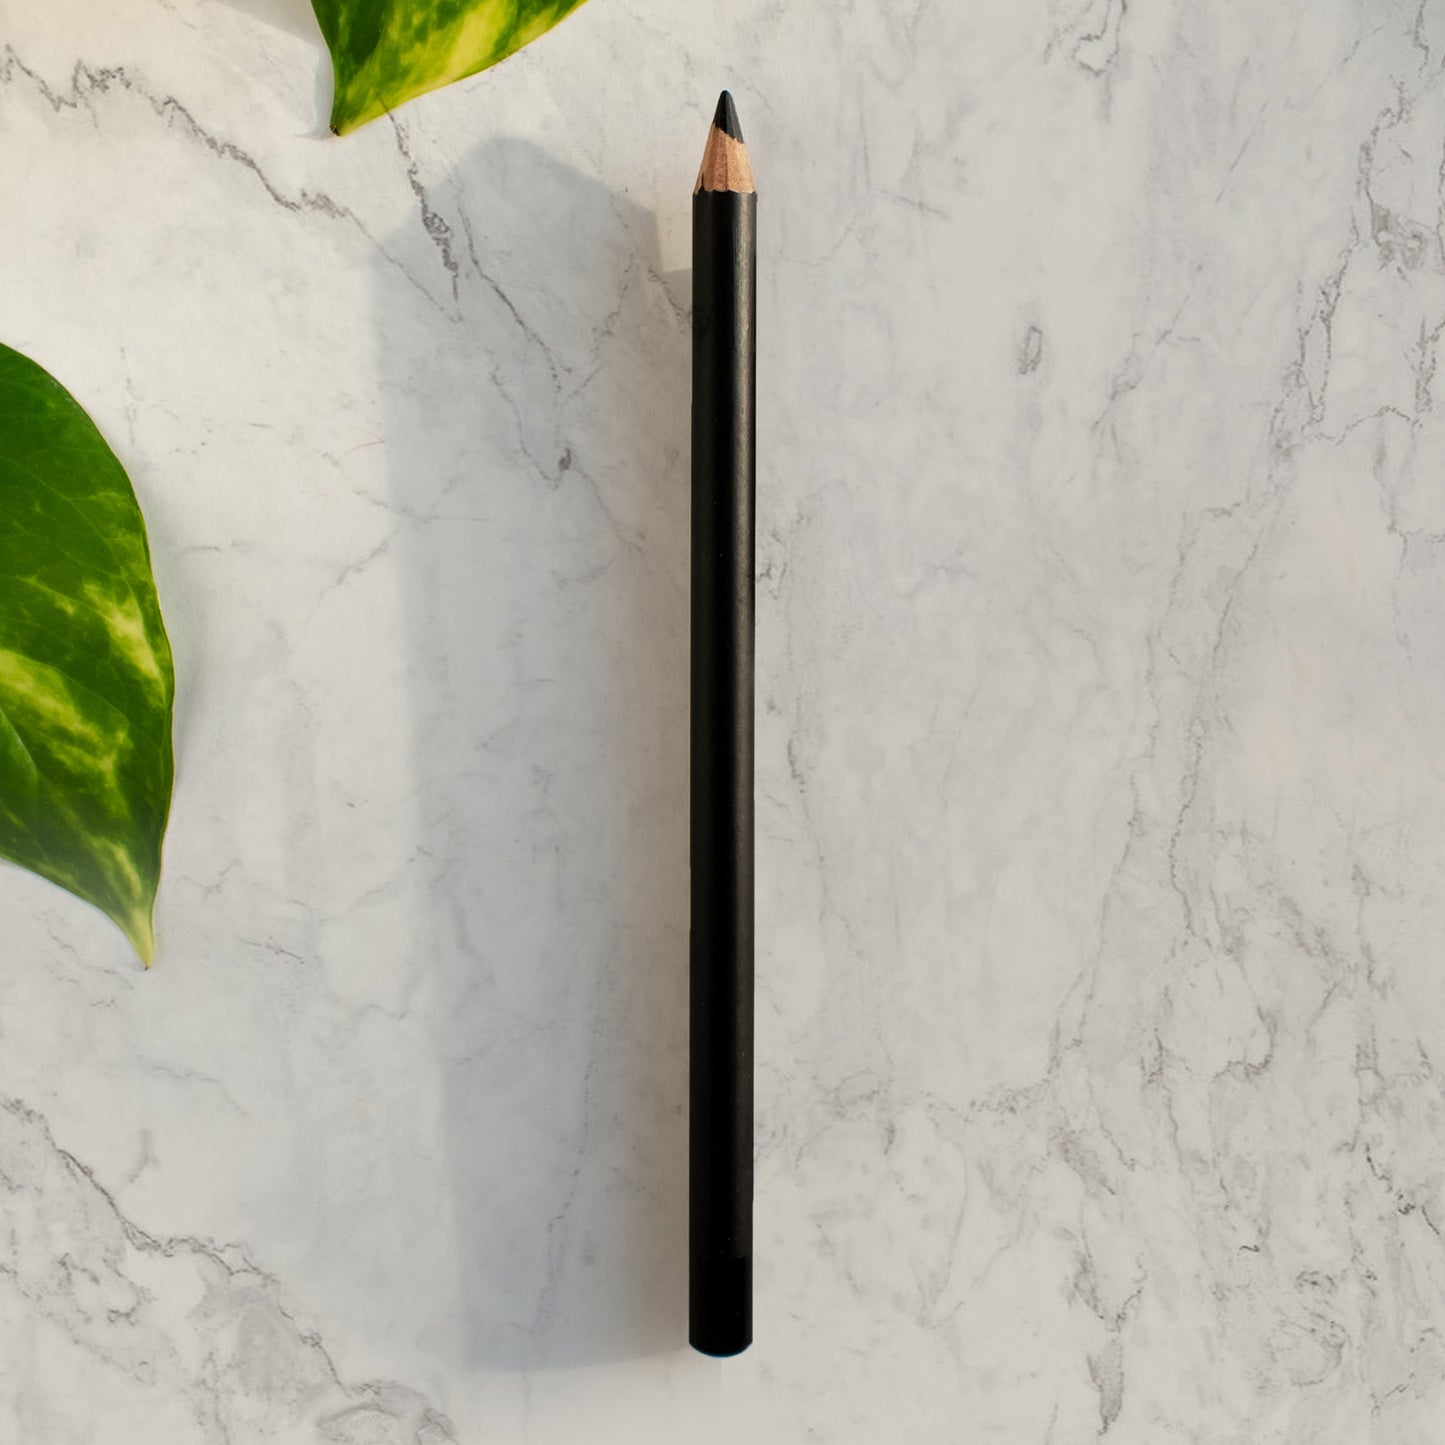 Cruisin Organics Lip Pencil in Rose Color.  Happiness opening up like a rose. I won't be sharing a fading glow, but rather a rose-colored lip color blossom. Use this pencil to create a rose-colored chromatic line. 